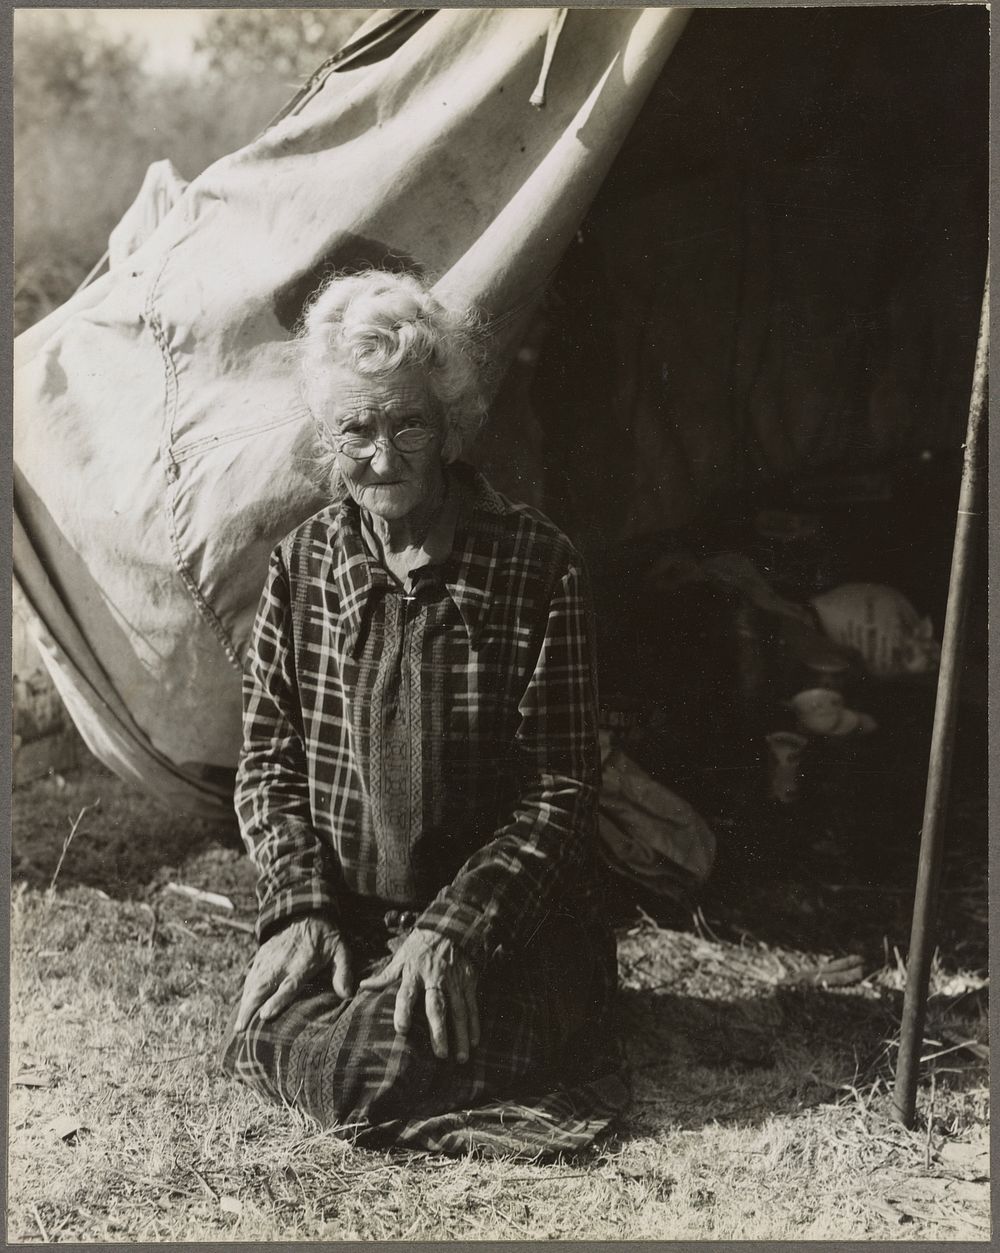 Bakersfield, Calif. (vicinity). Grandmother of 22 children, from a farm in Oklahoma, 80 years old, now living in a camp "If…